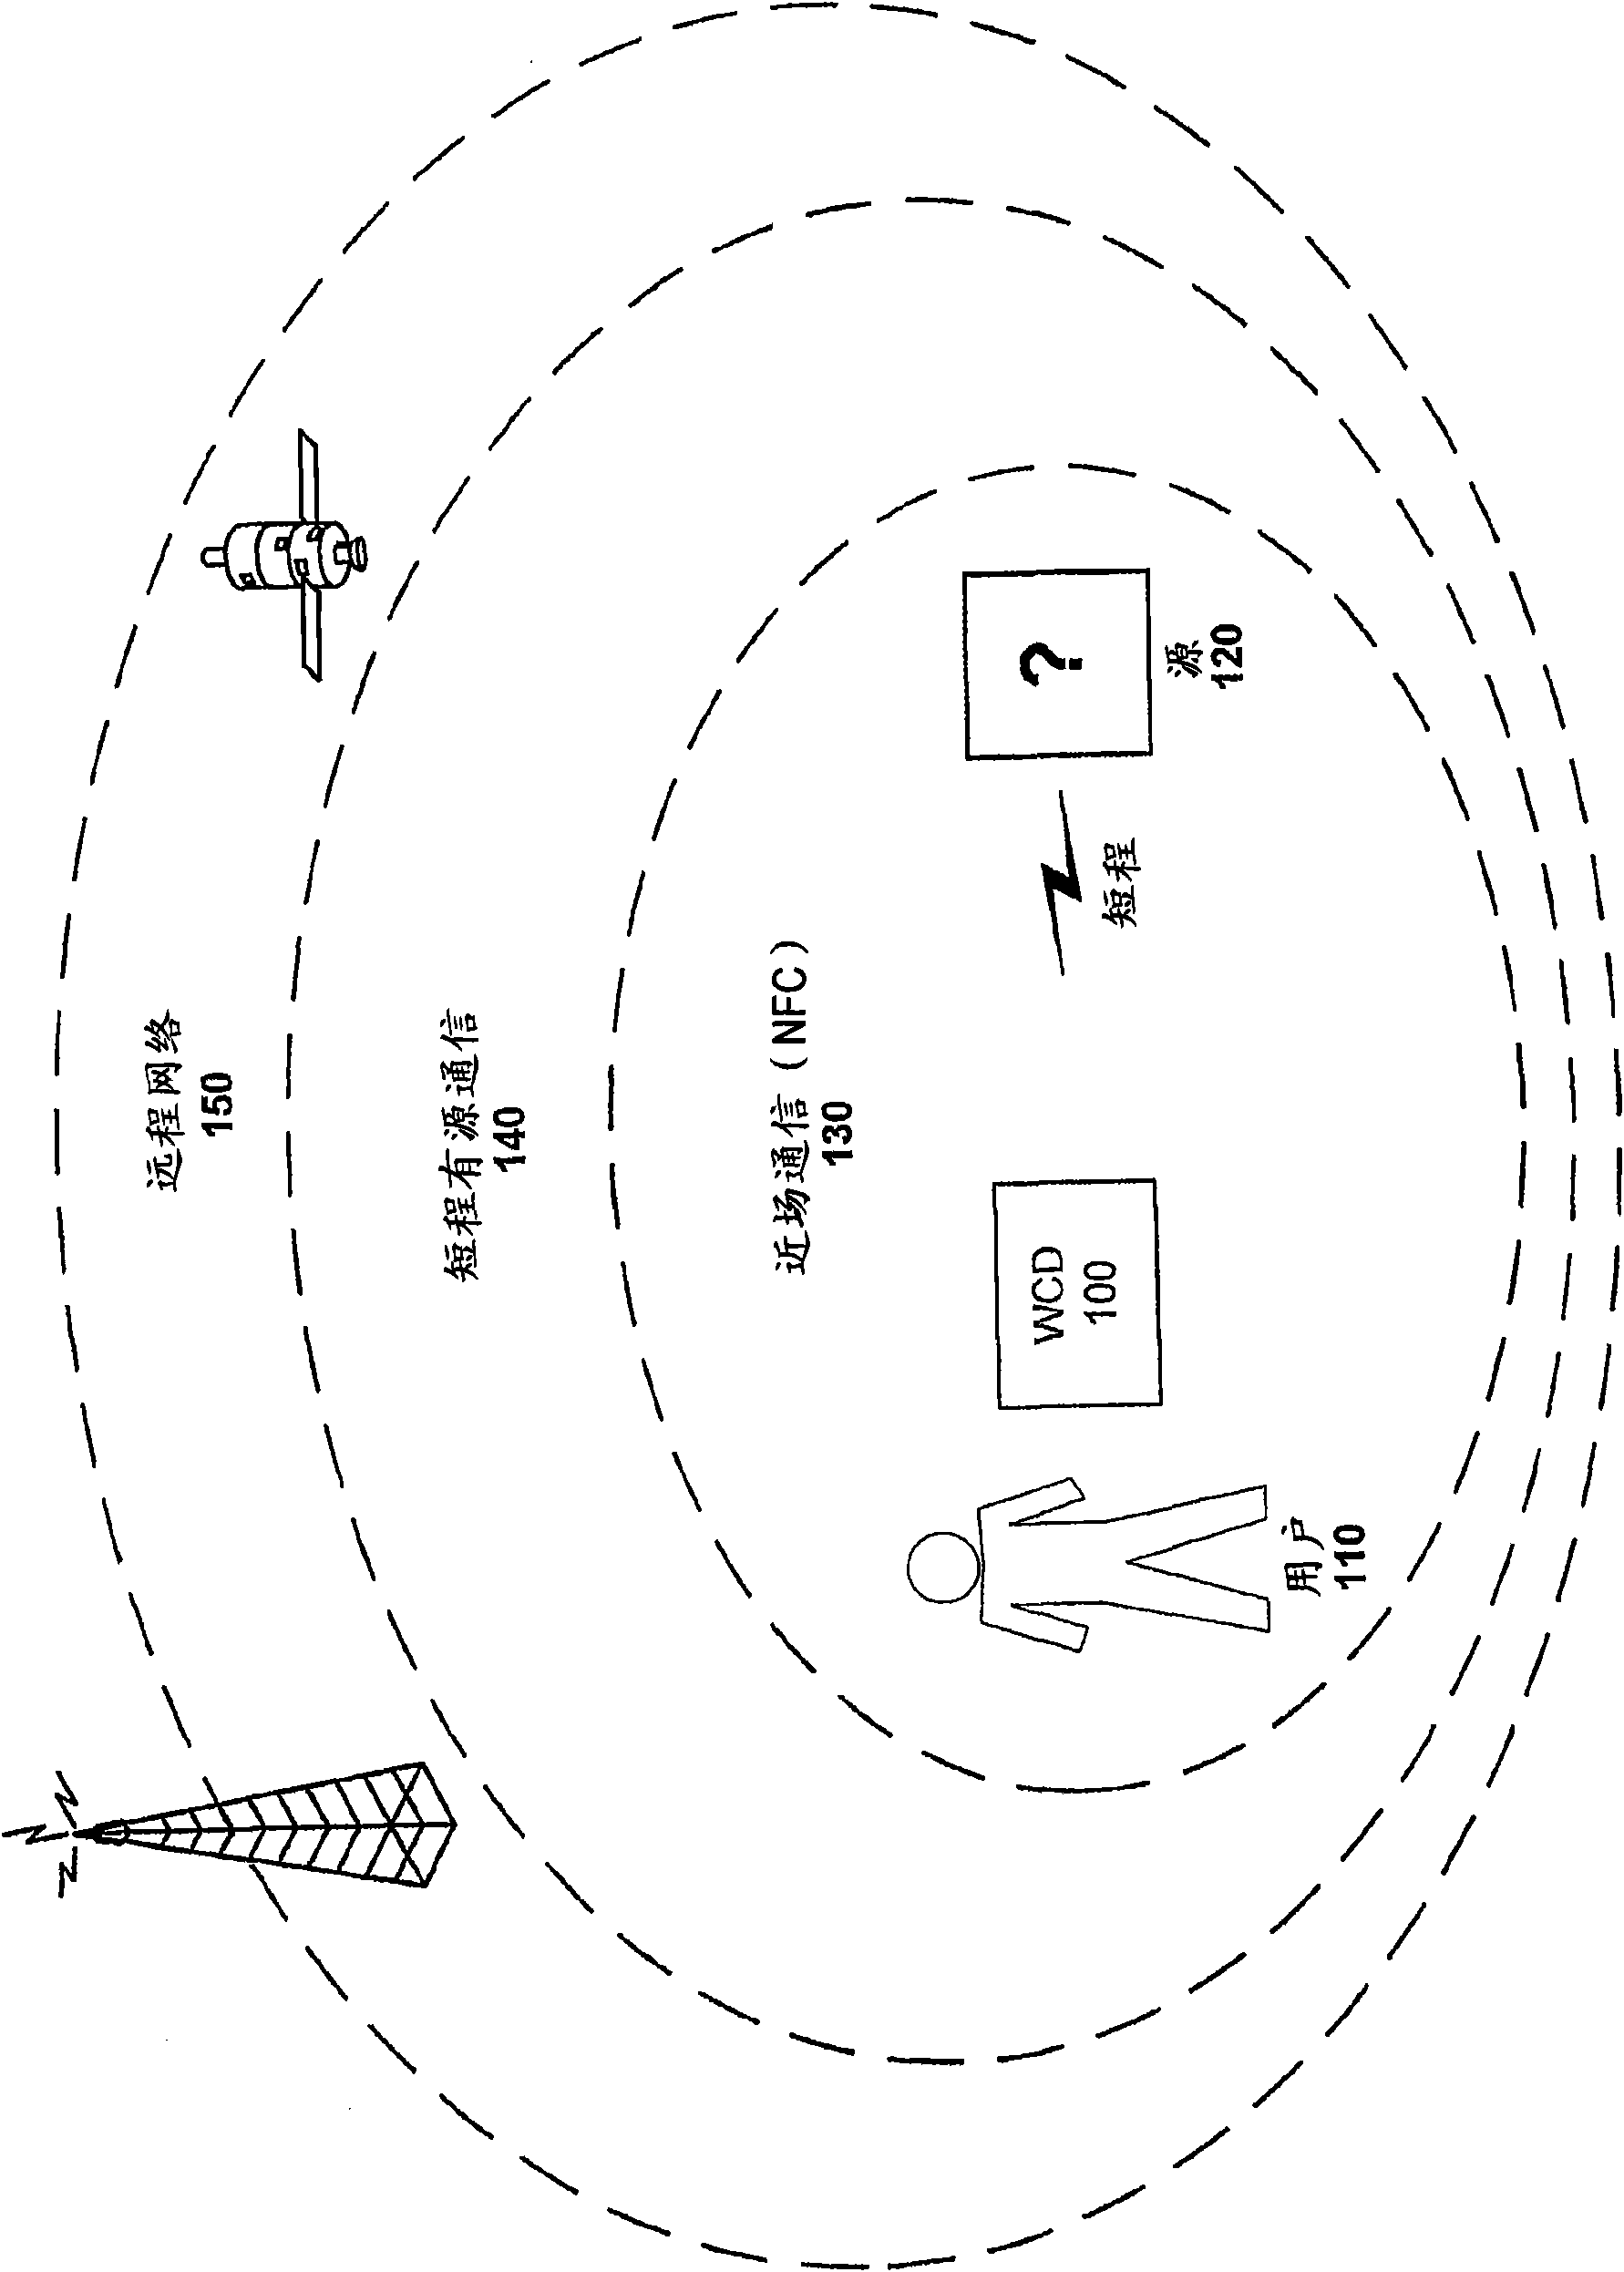 Connection point triggered scanning for positioning radios